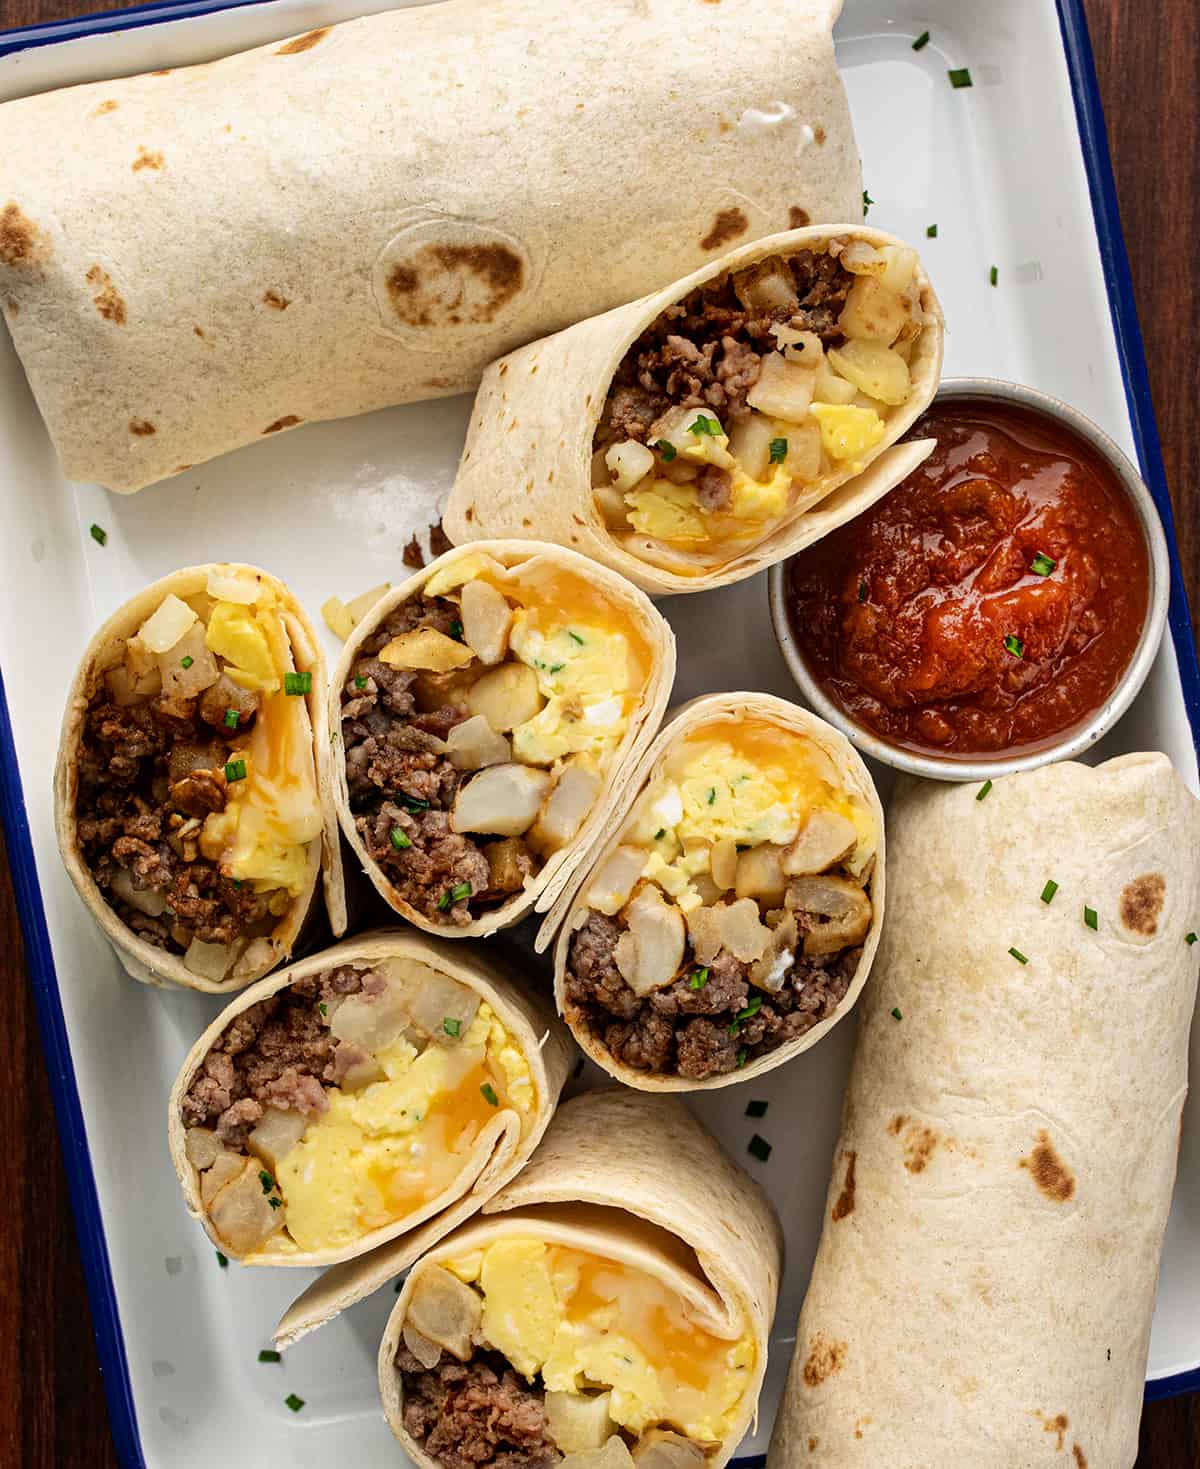 Pan of Breakfast Burritos with Salsa and Sour Cream and Some Burritos Cut in Half Showing Inside Texture. 